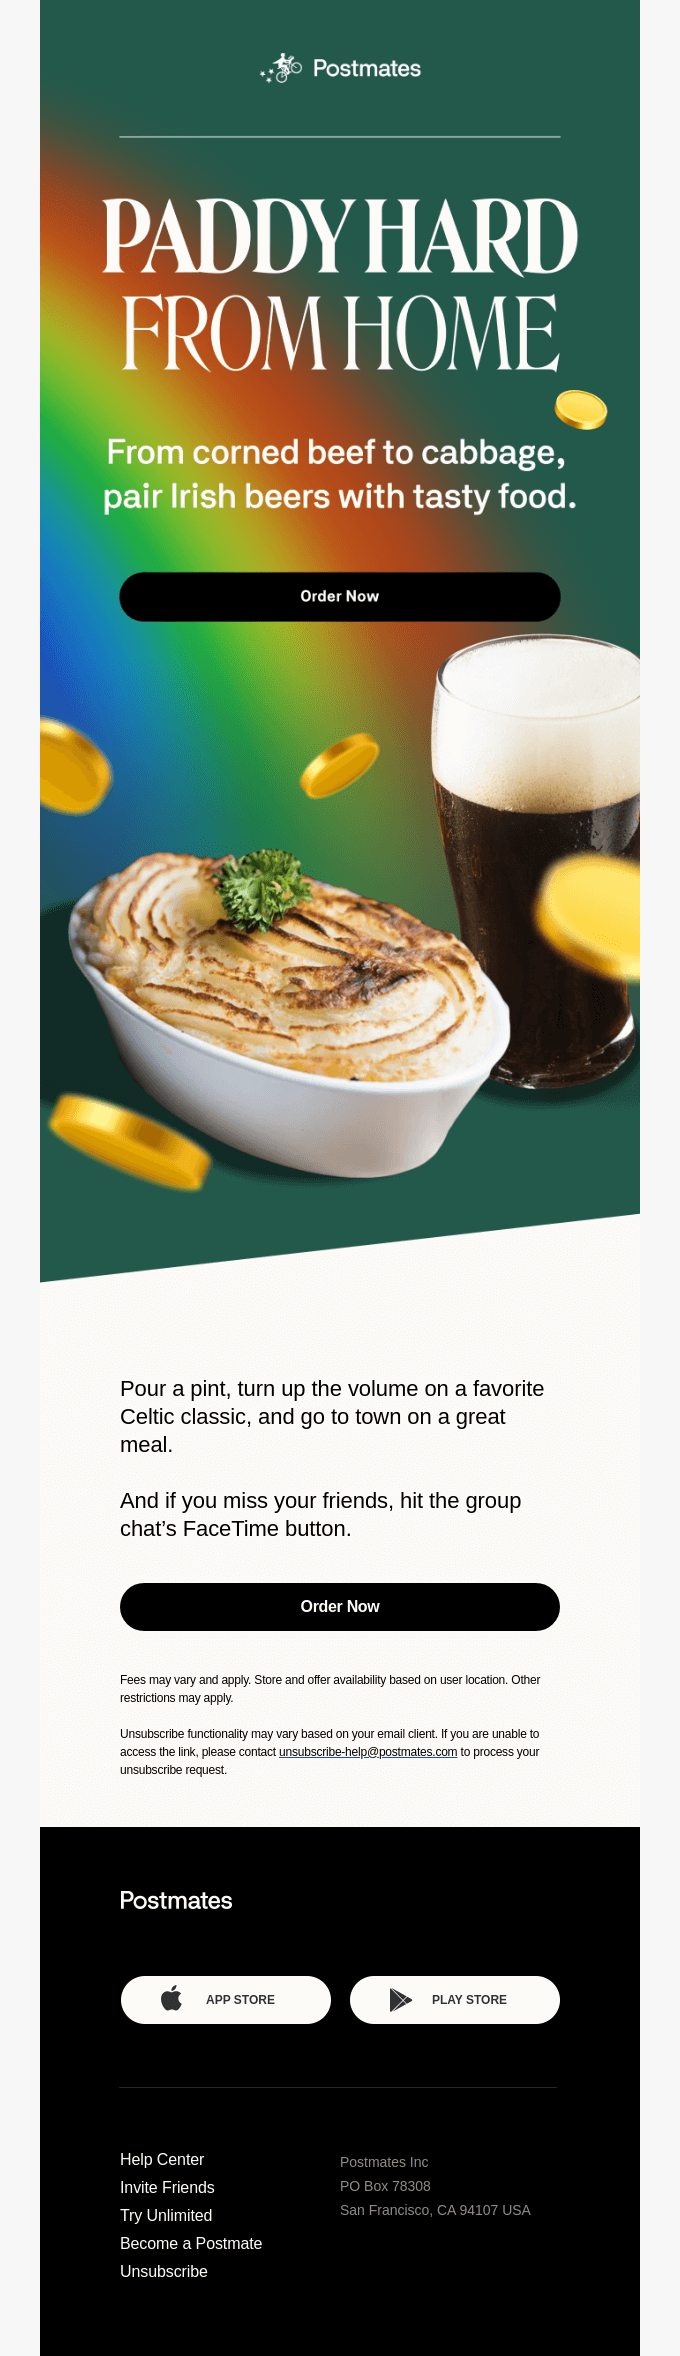 Postmates's St. Patrick’s Day email